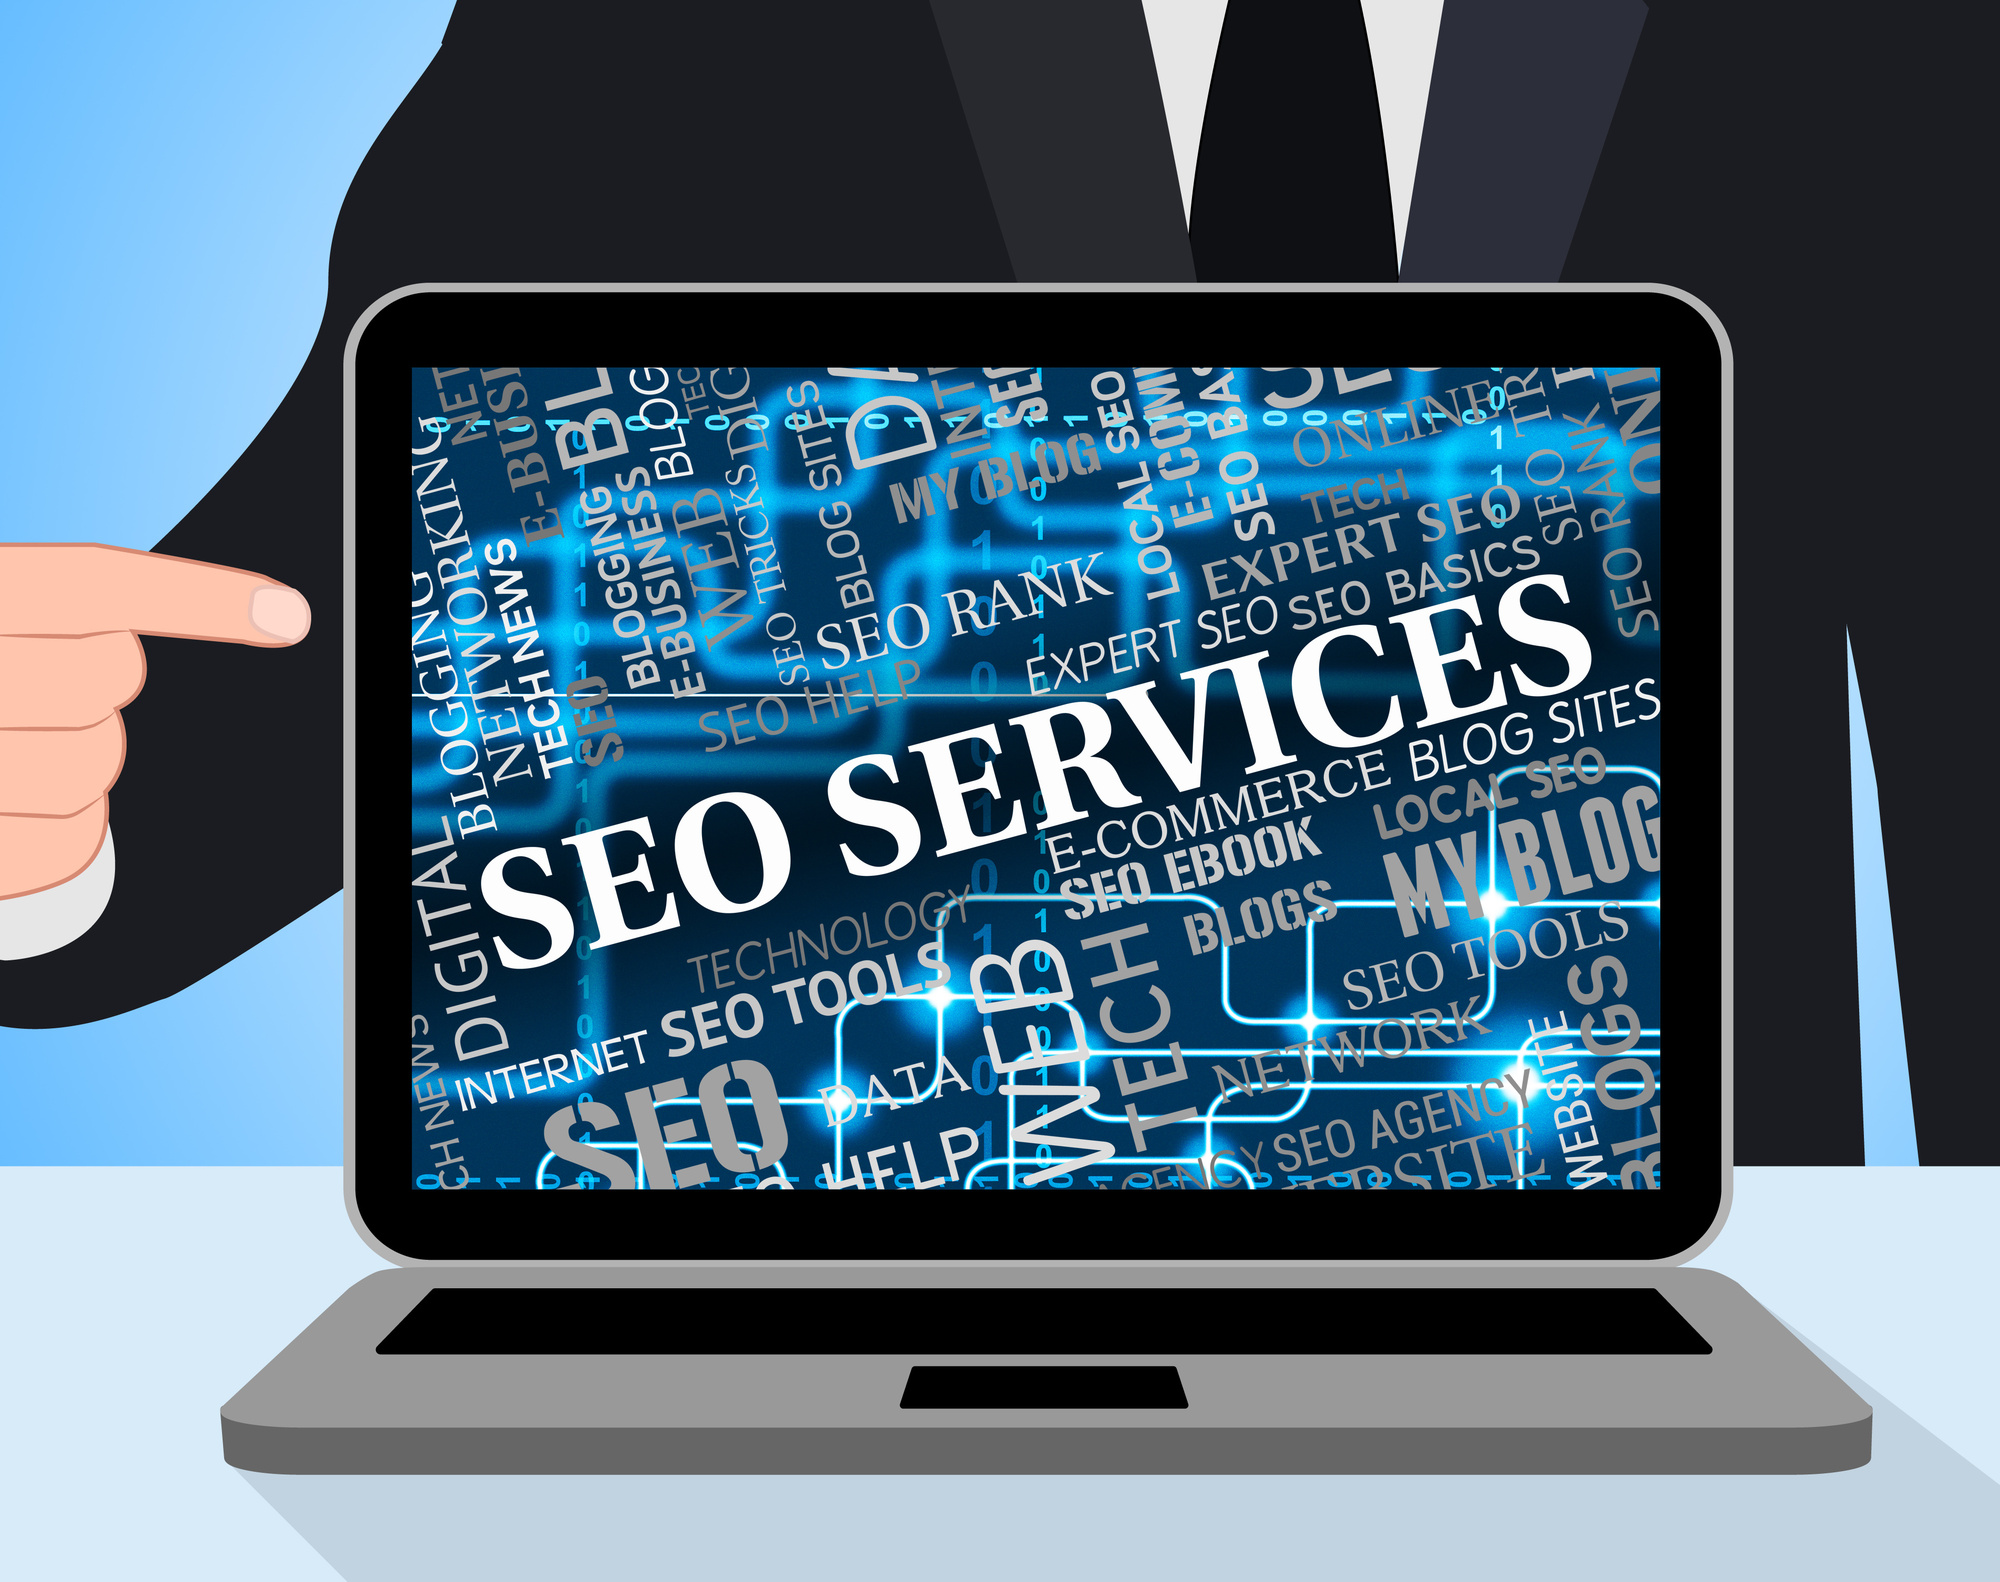 SEO services text on computer